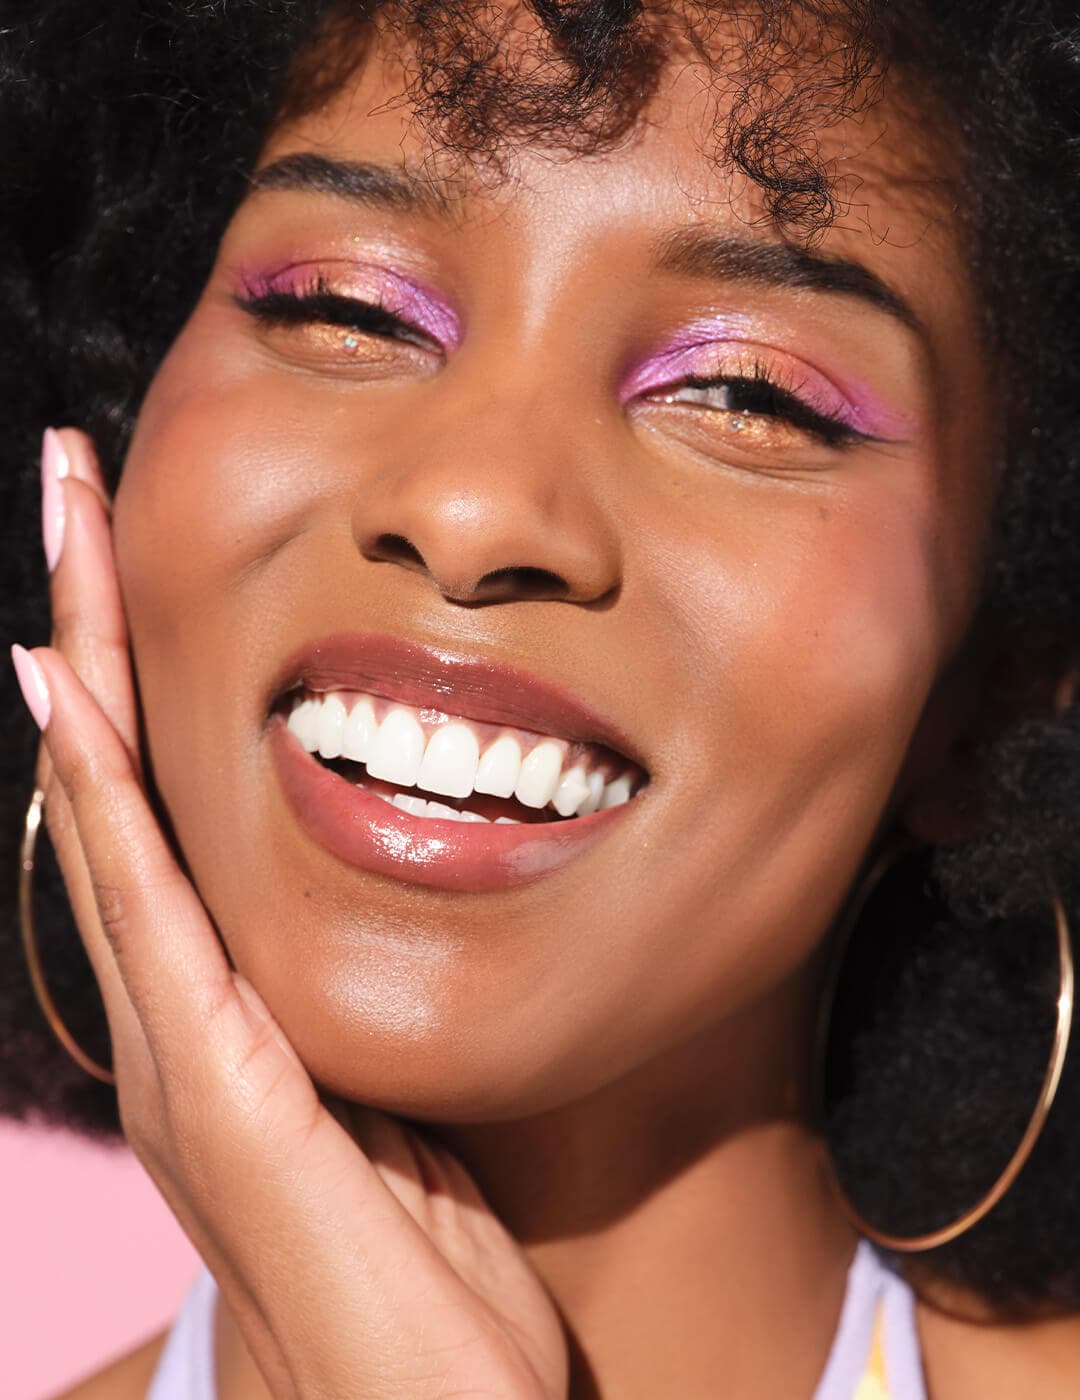 Close-up of a smiling model with shimmery pink and orange eyeshadow makeup look